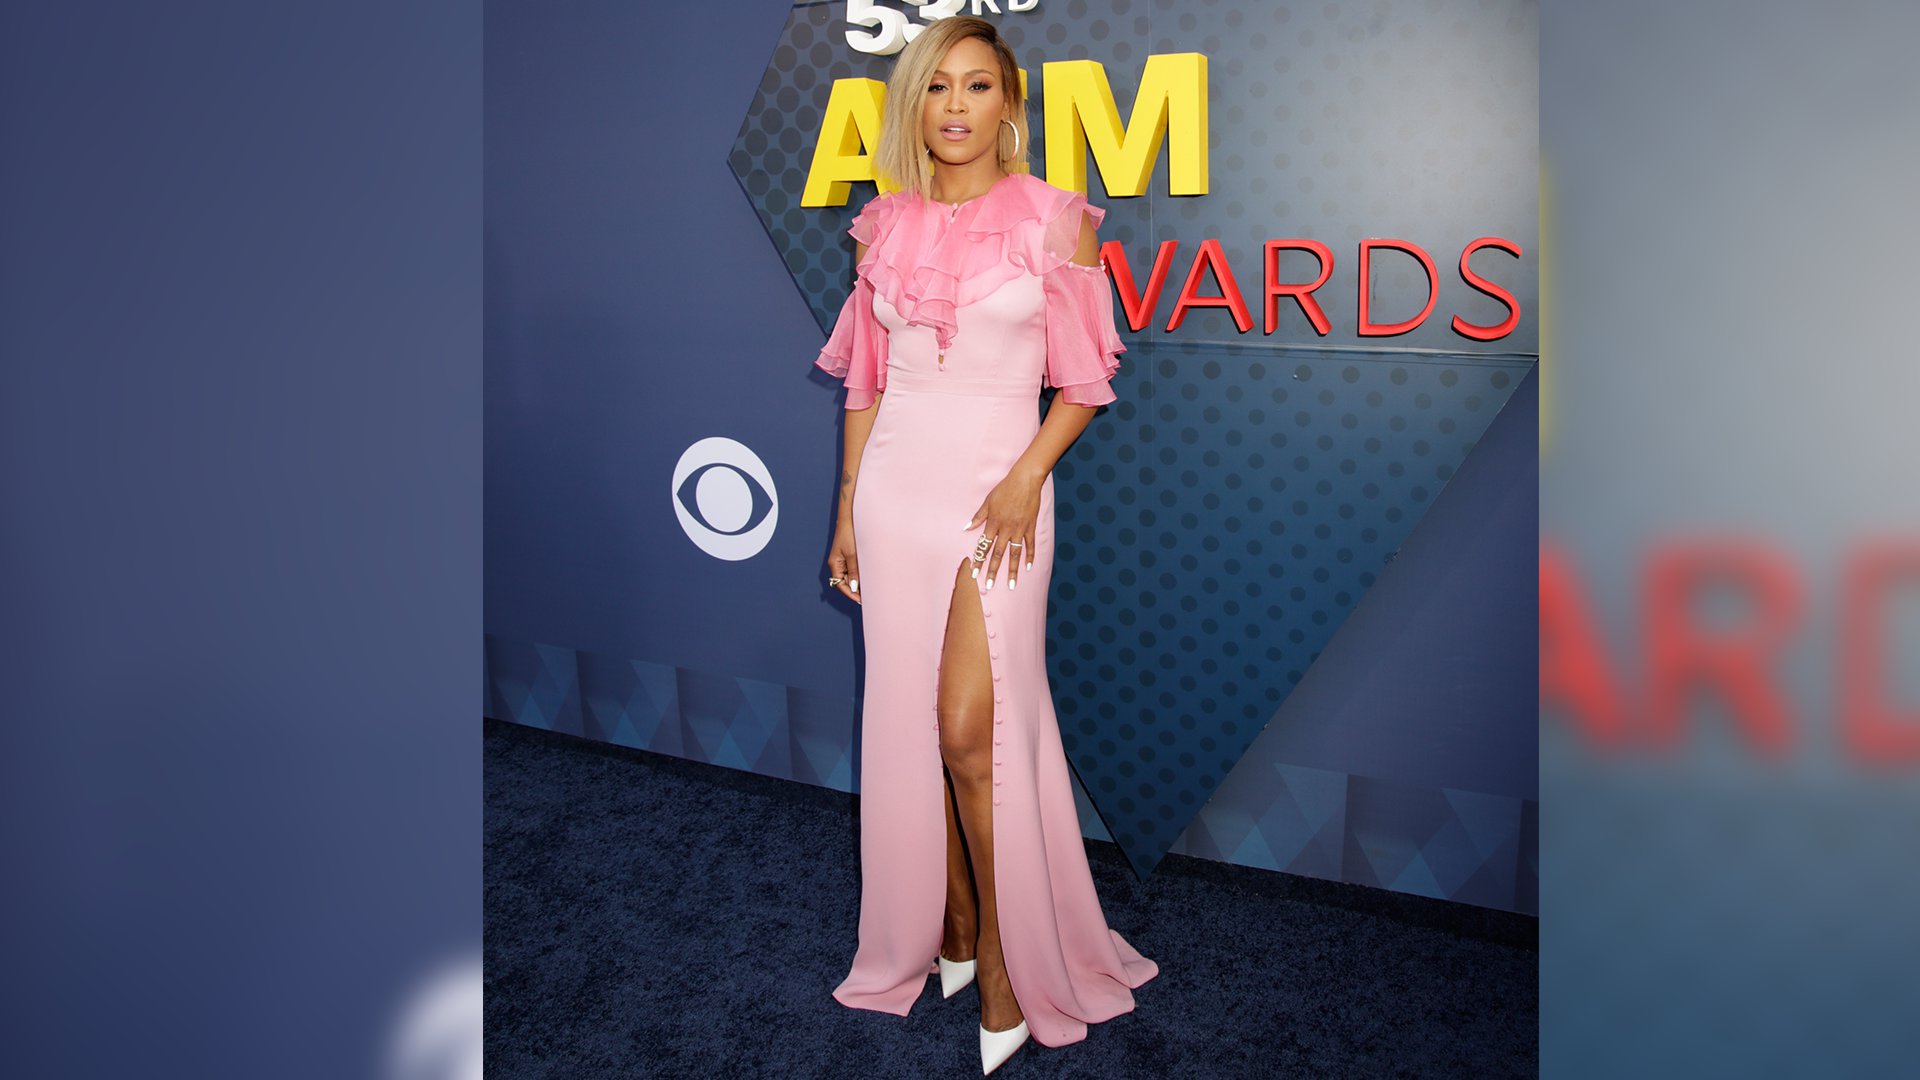 Eve might be a long way from The Talk, but she fits in famously on the ACM red carpet.